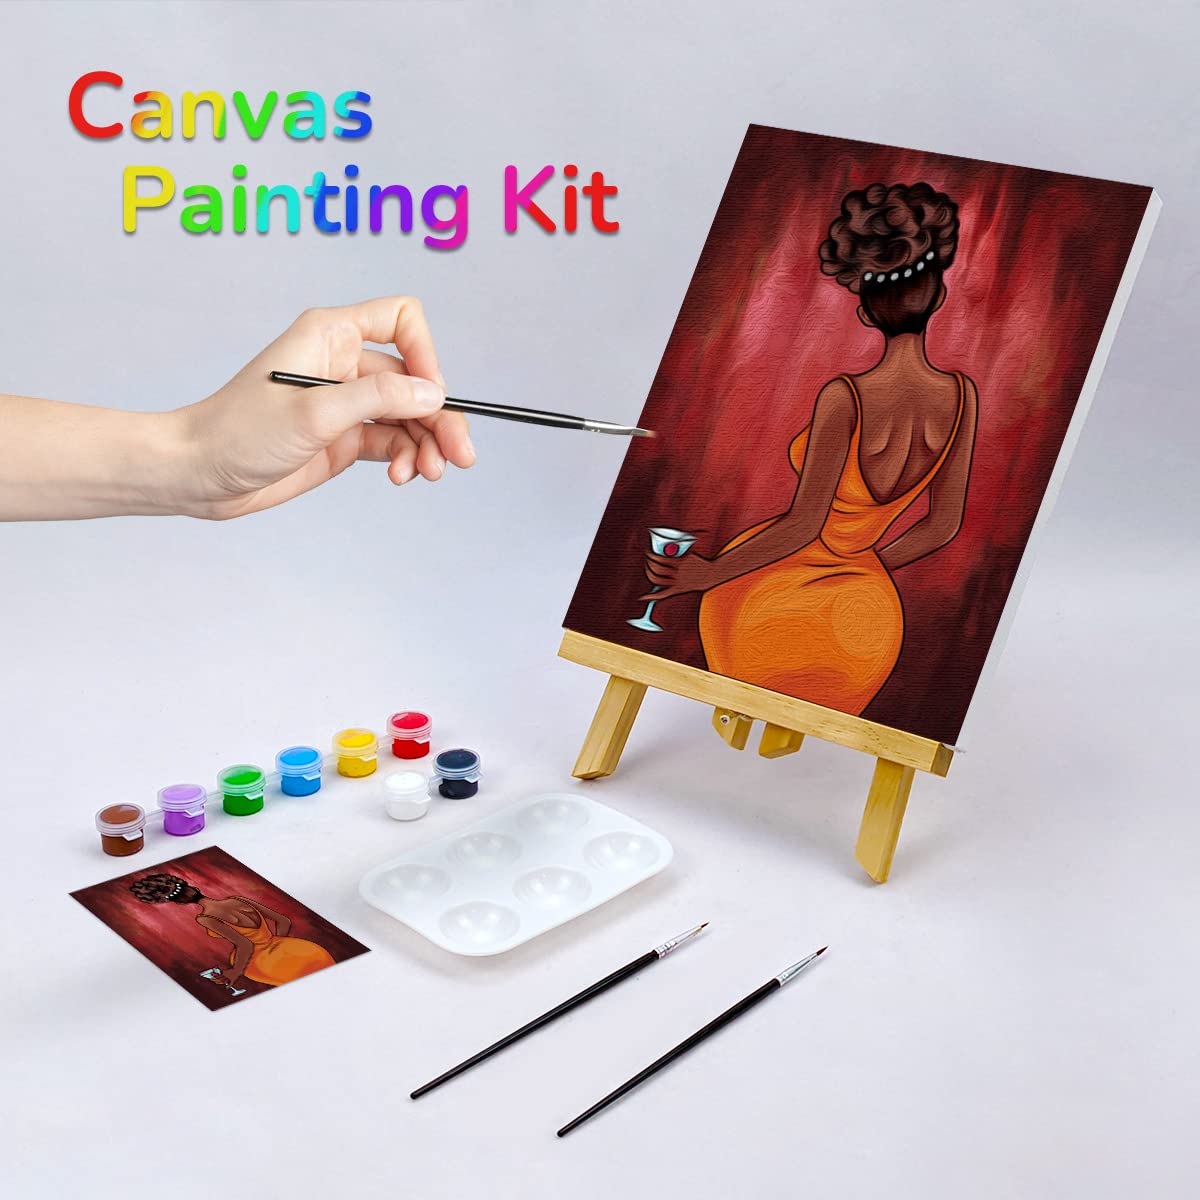  VOCHIC Canvas Painting Kit Pre Drawn Canvas for Painting for Adults  Painting Party Kits Paint and Sip Party Supplies 8x10 Canvas to Paint 8  Acrylic Colors,3 Brush,1 Pallet Girl Paint Art